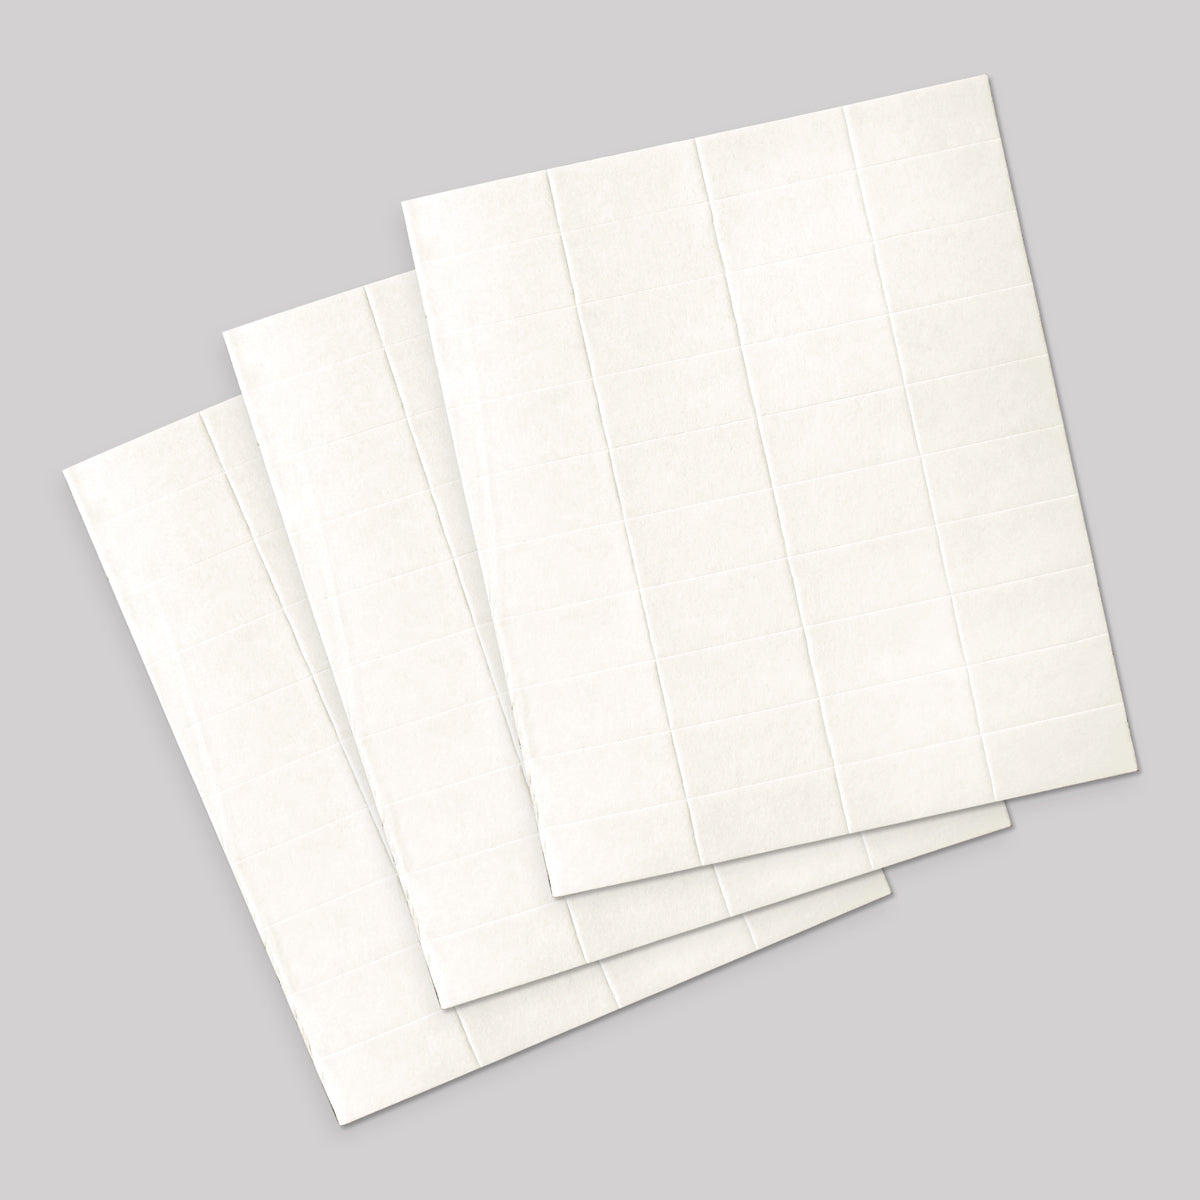 24x12mm Double Sided Adhesive Pads - White 2mm, pack of 3